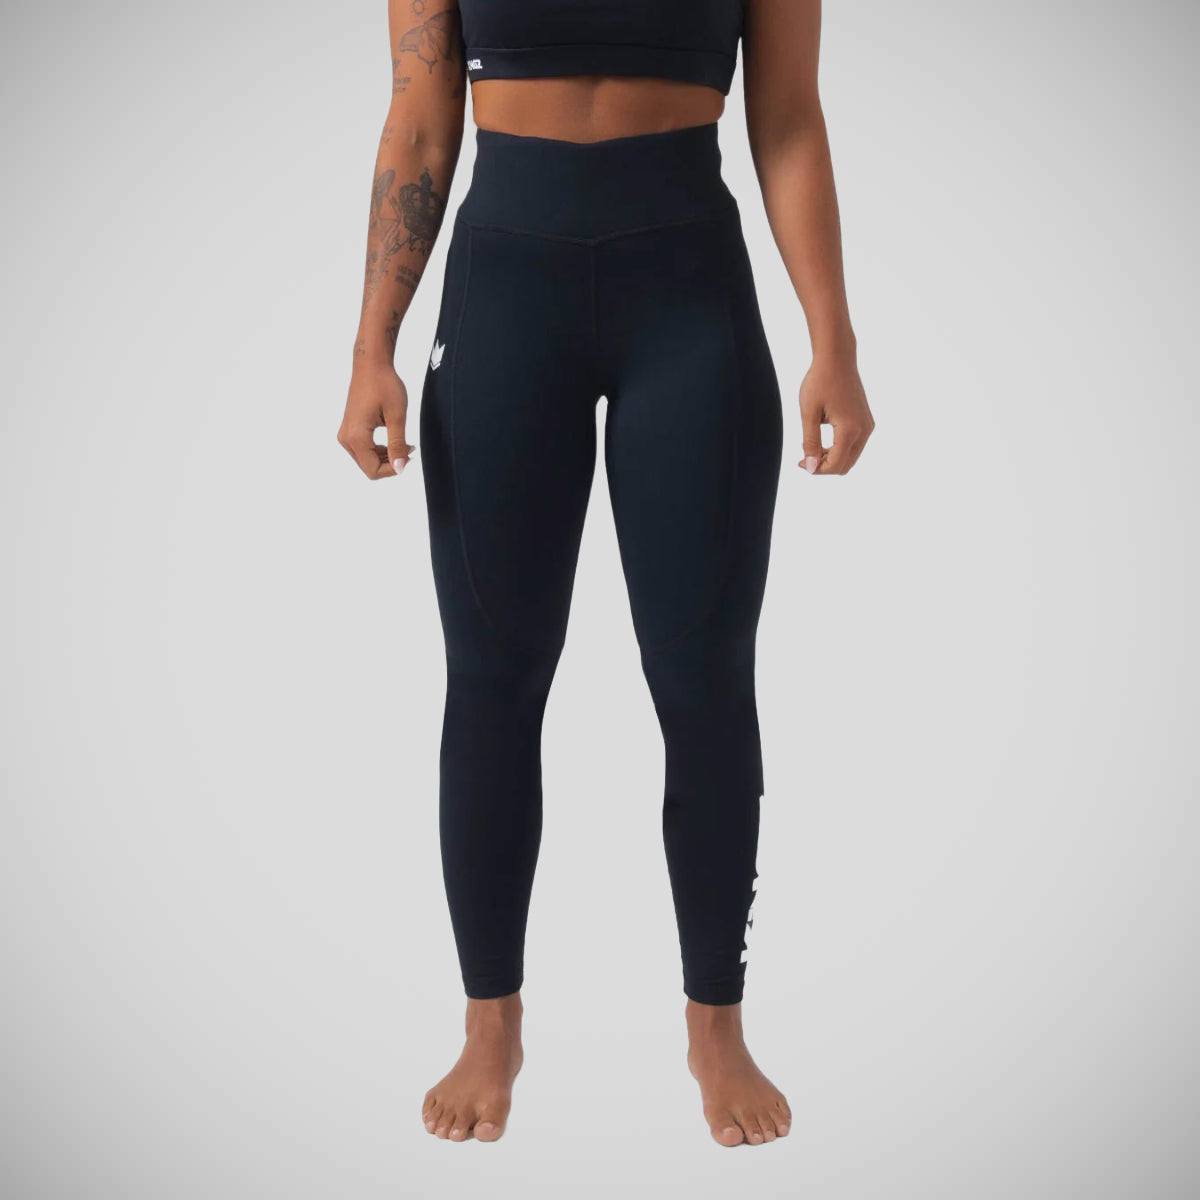 Women's Spats / Leggings from Made4Fighters